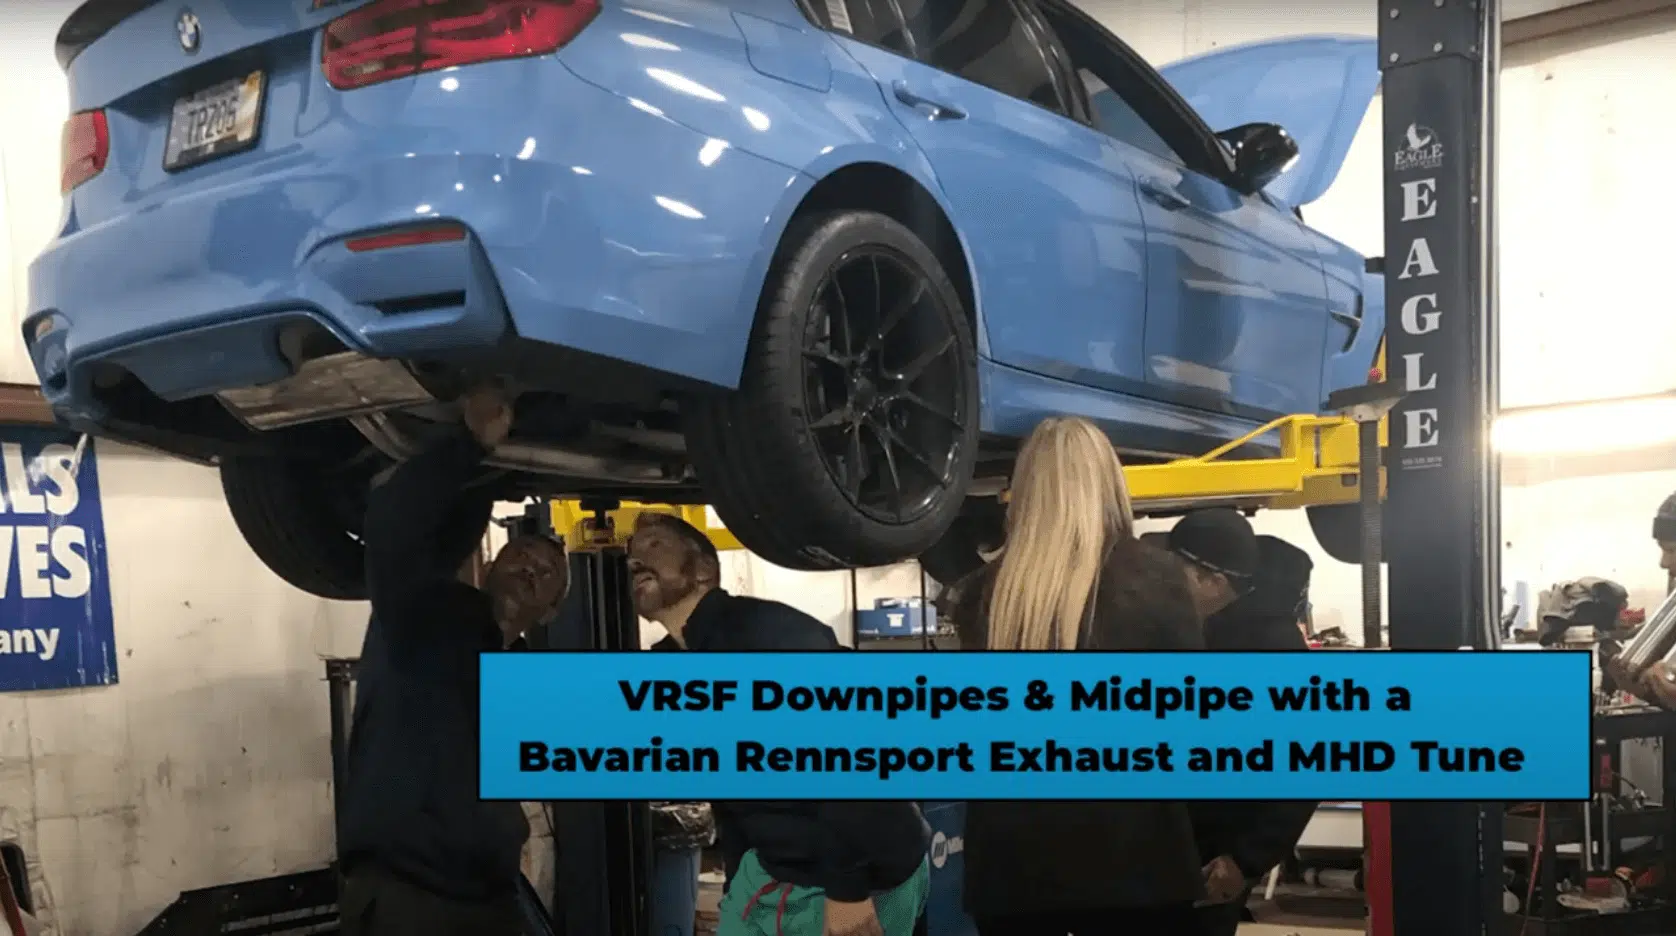 BMW M3 F80 with VRSF Downpipes, Midpipe with Bavarian Rennsport Exhaust, MHD Tune